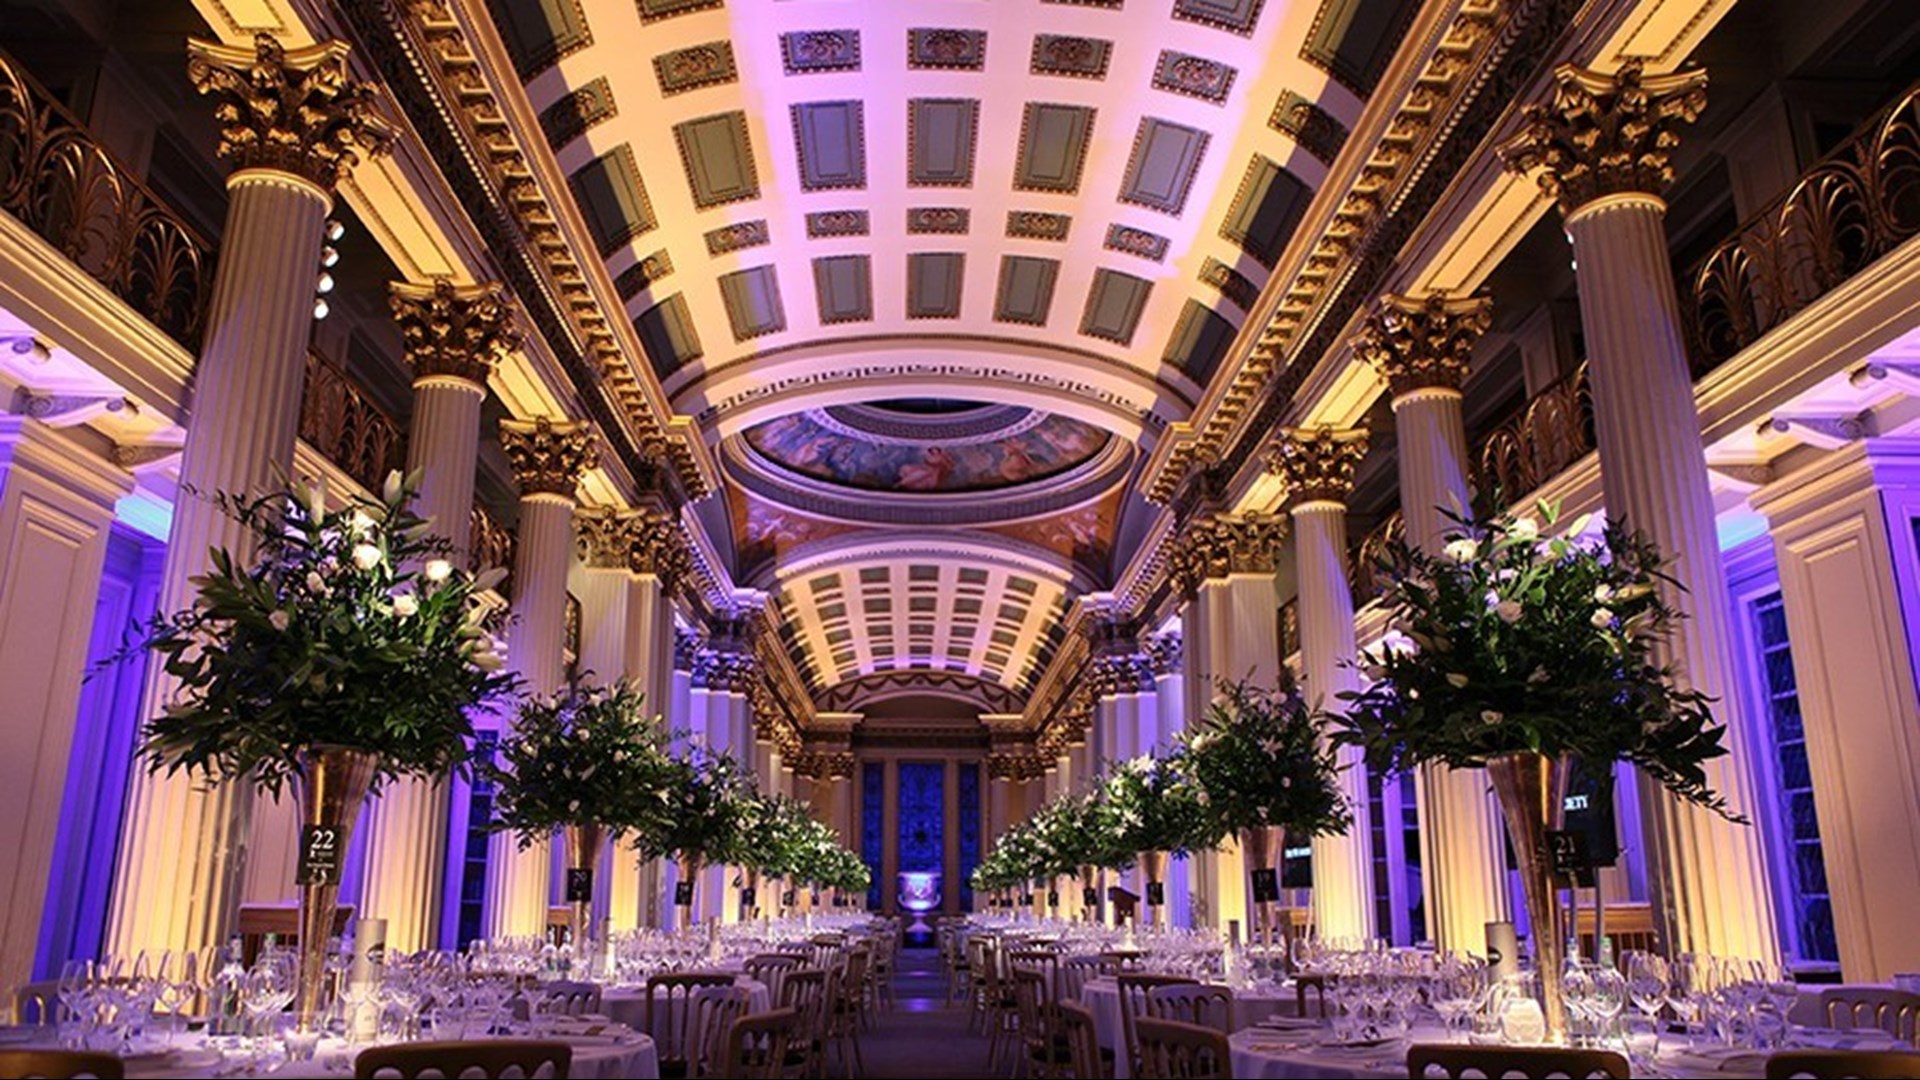 10 Unique Scottish Wedding Venues To Consider For Your Big Day